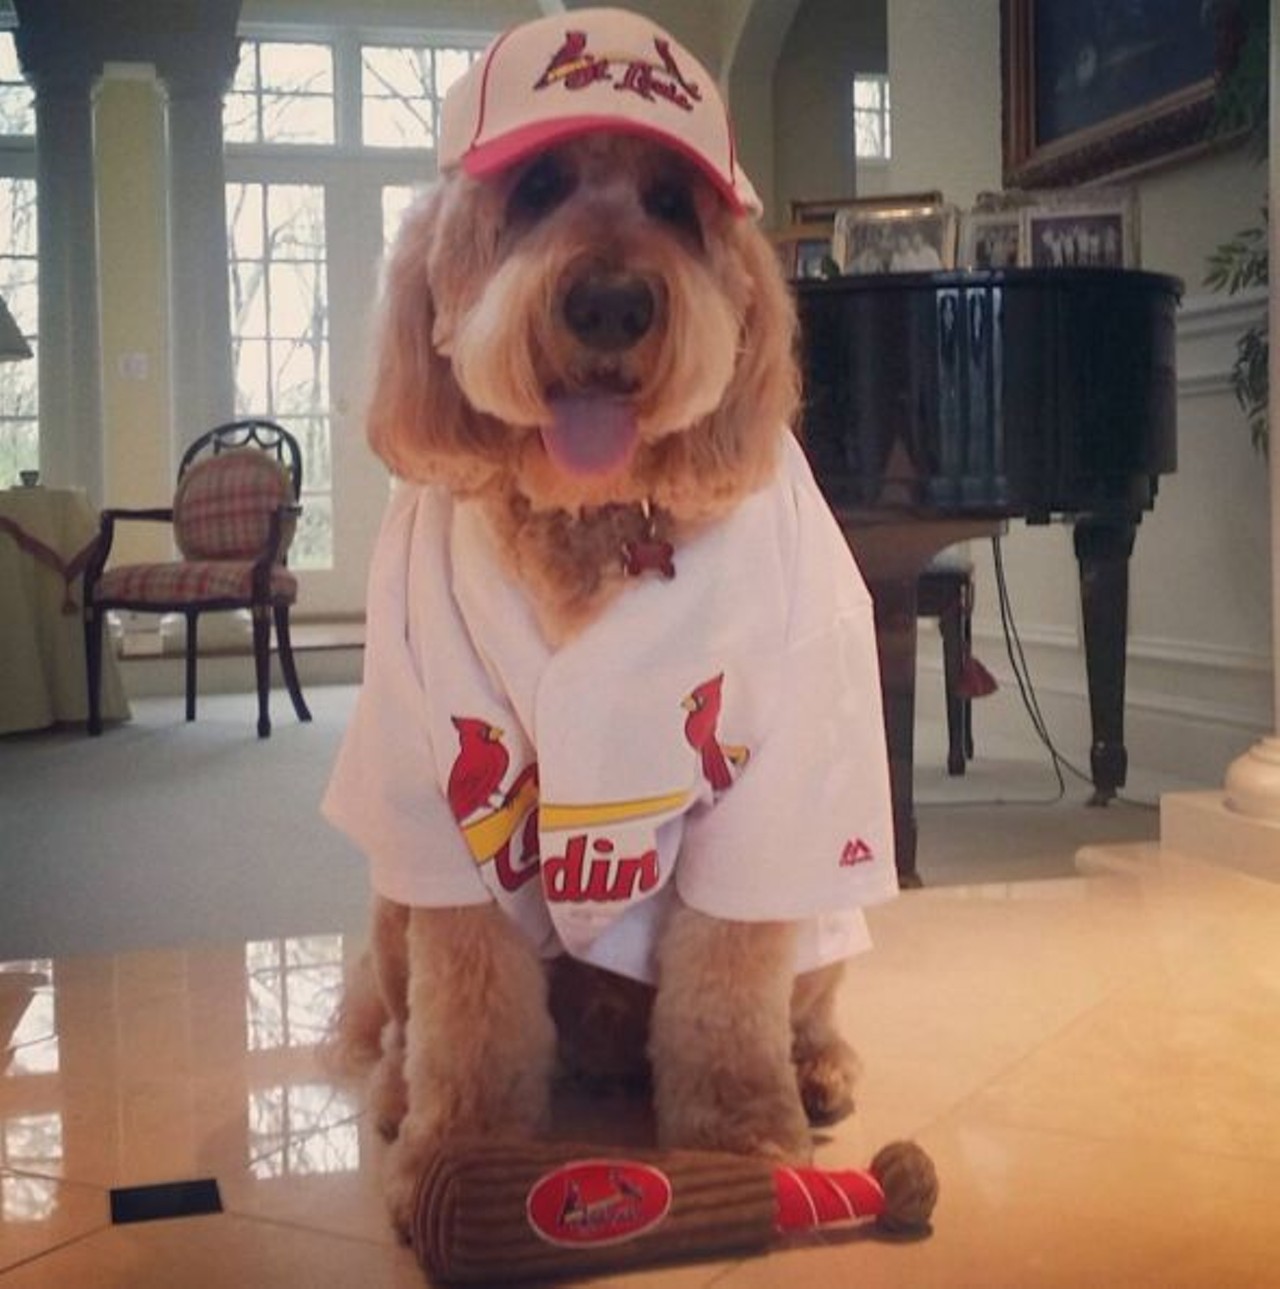 Cardinal hat? Check. Cardinal jersey? Check. Baseball bat? Check. Yep, this dog is ready. Happy game day, everyone! Photo courtesy of Instagram / cooperthegoldendoodle.